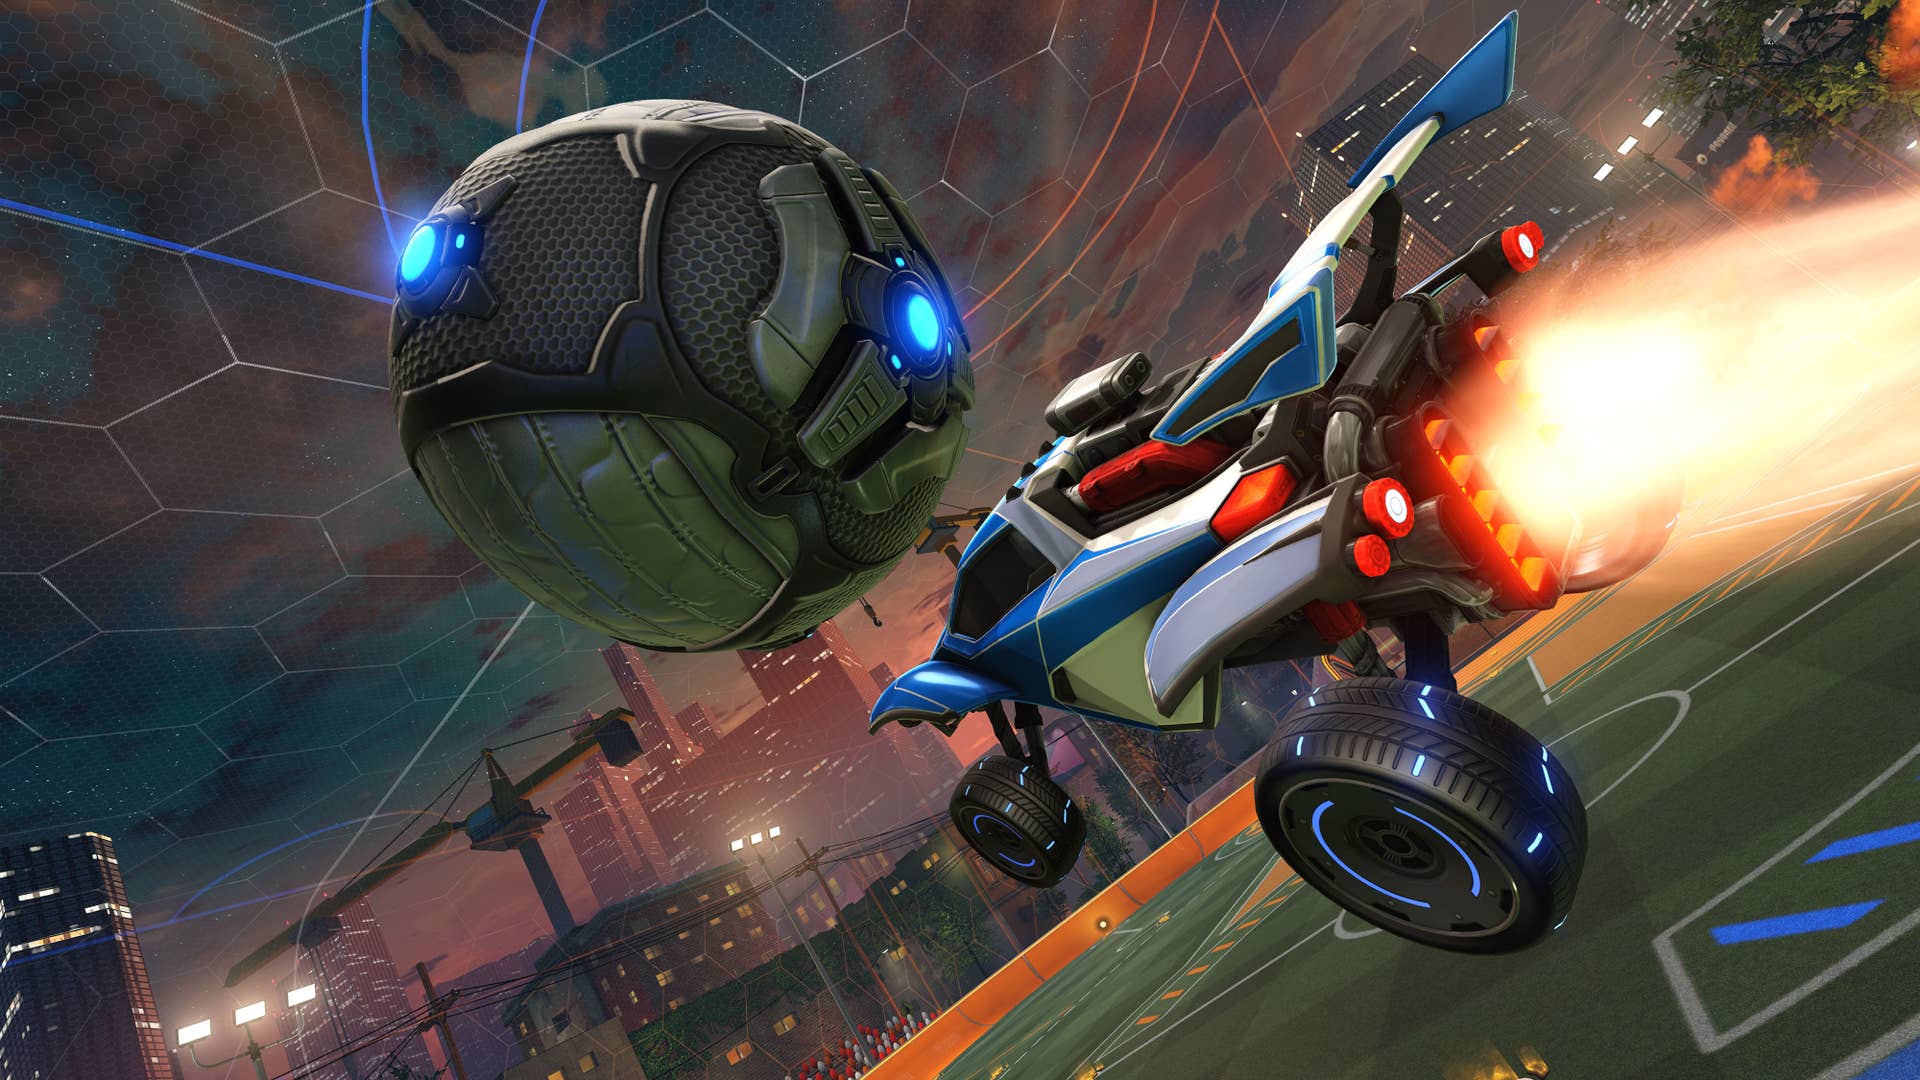 Epic Games Account Linking  Rocket League® - Official Site